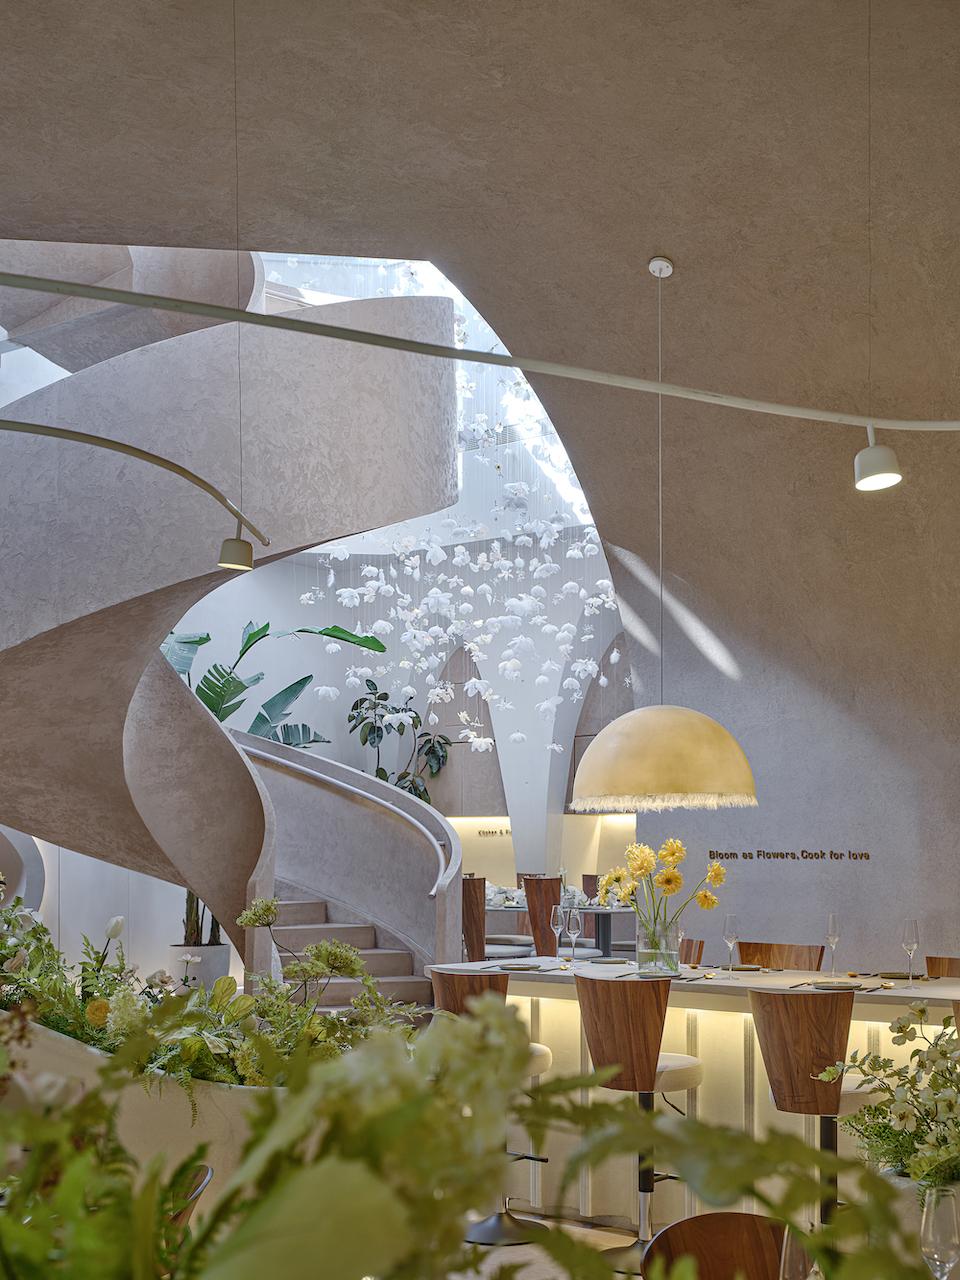 The New Tomacado Restaurant at Shanghai IFC is a Secluded Paradise in the Bustling City